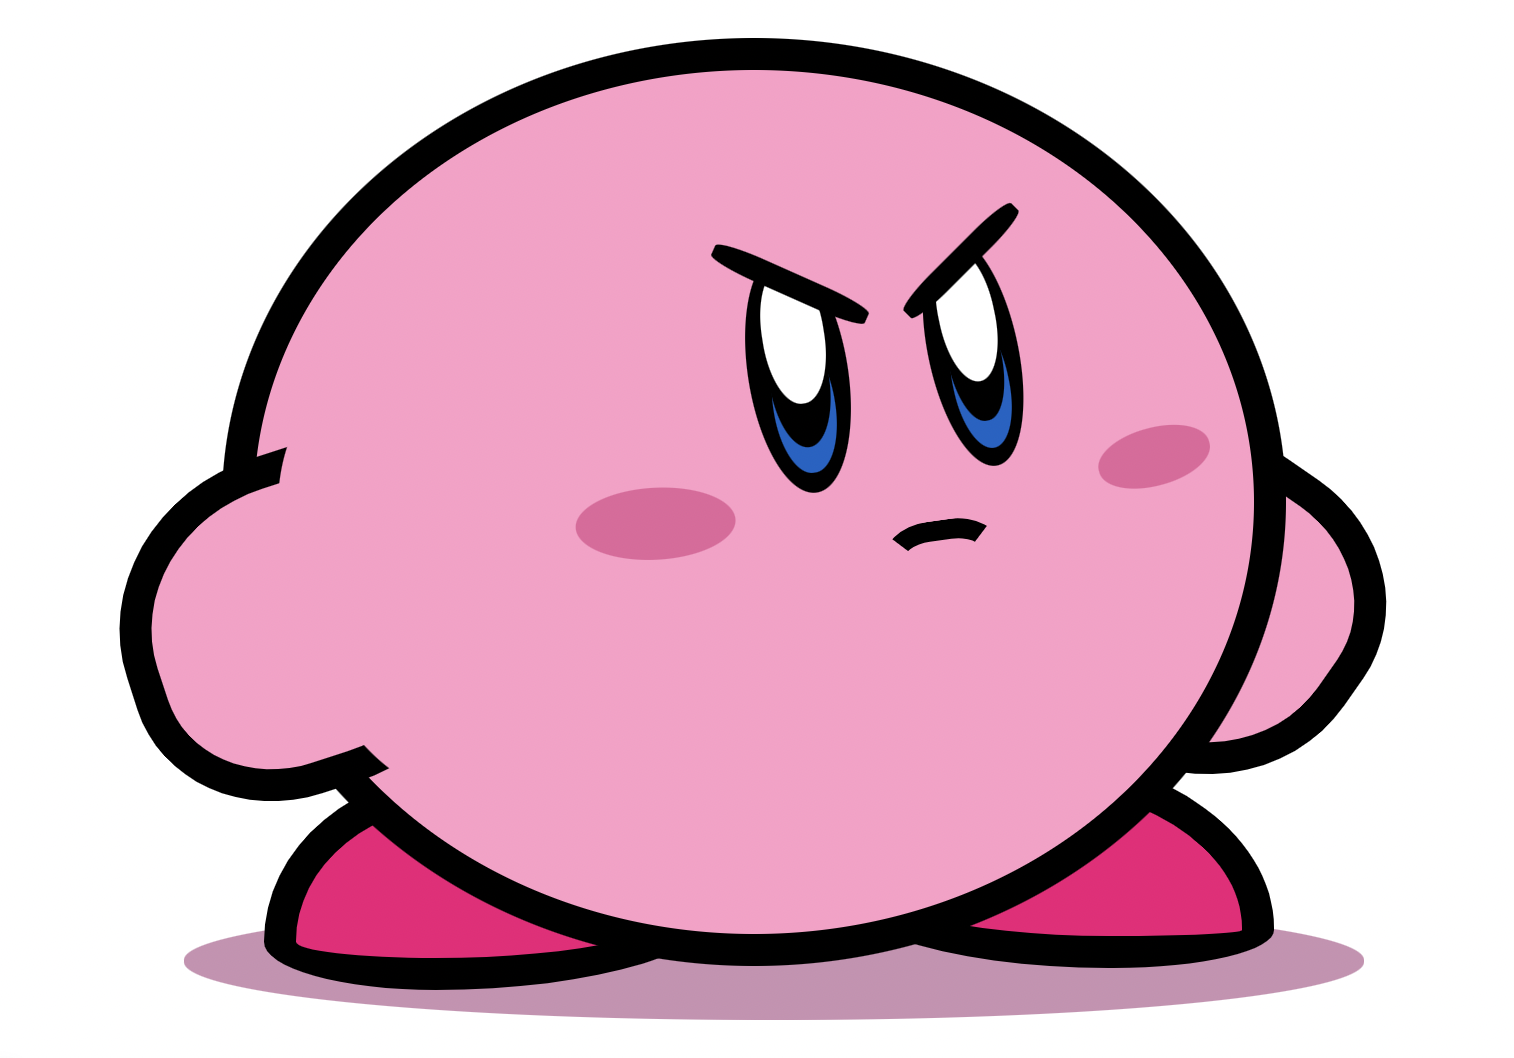 Creating Kirby with CSS art